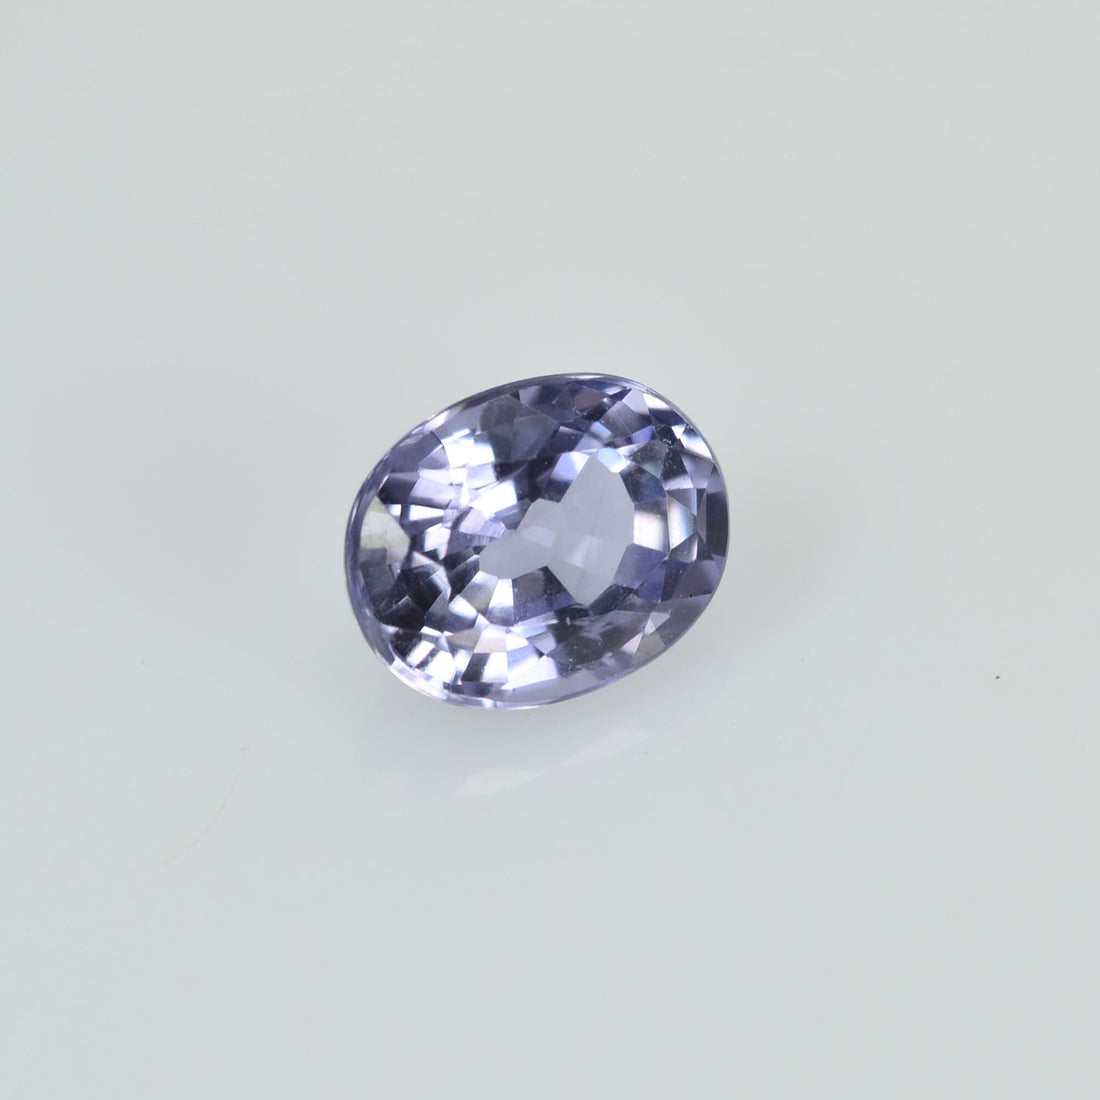 0.47 cts Natural Lavender Sapphire Loose Gemstone Oval Cut